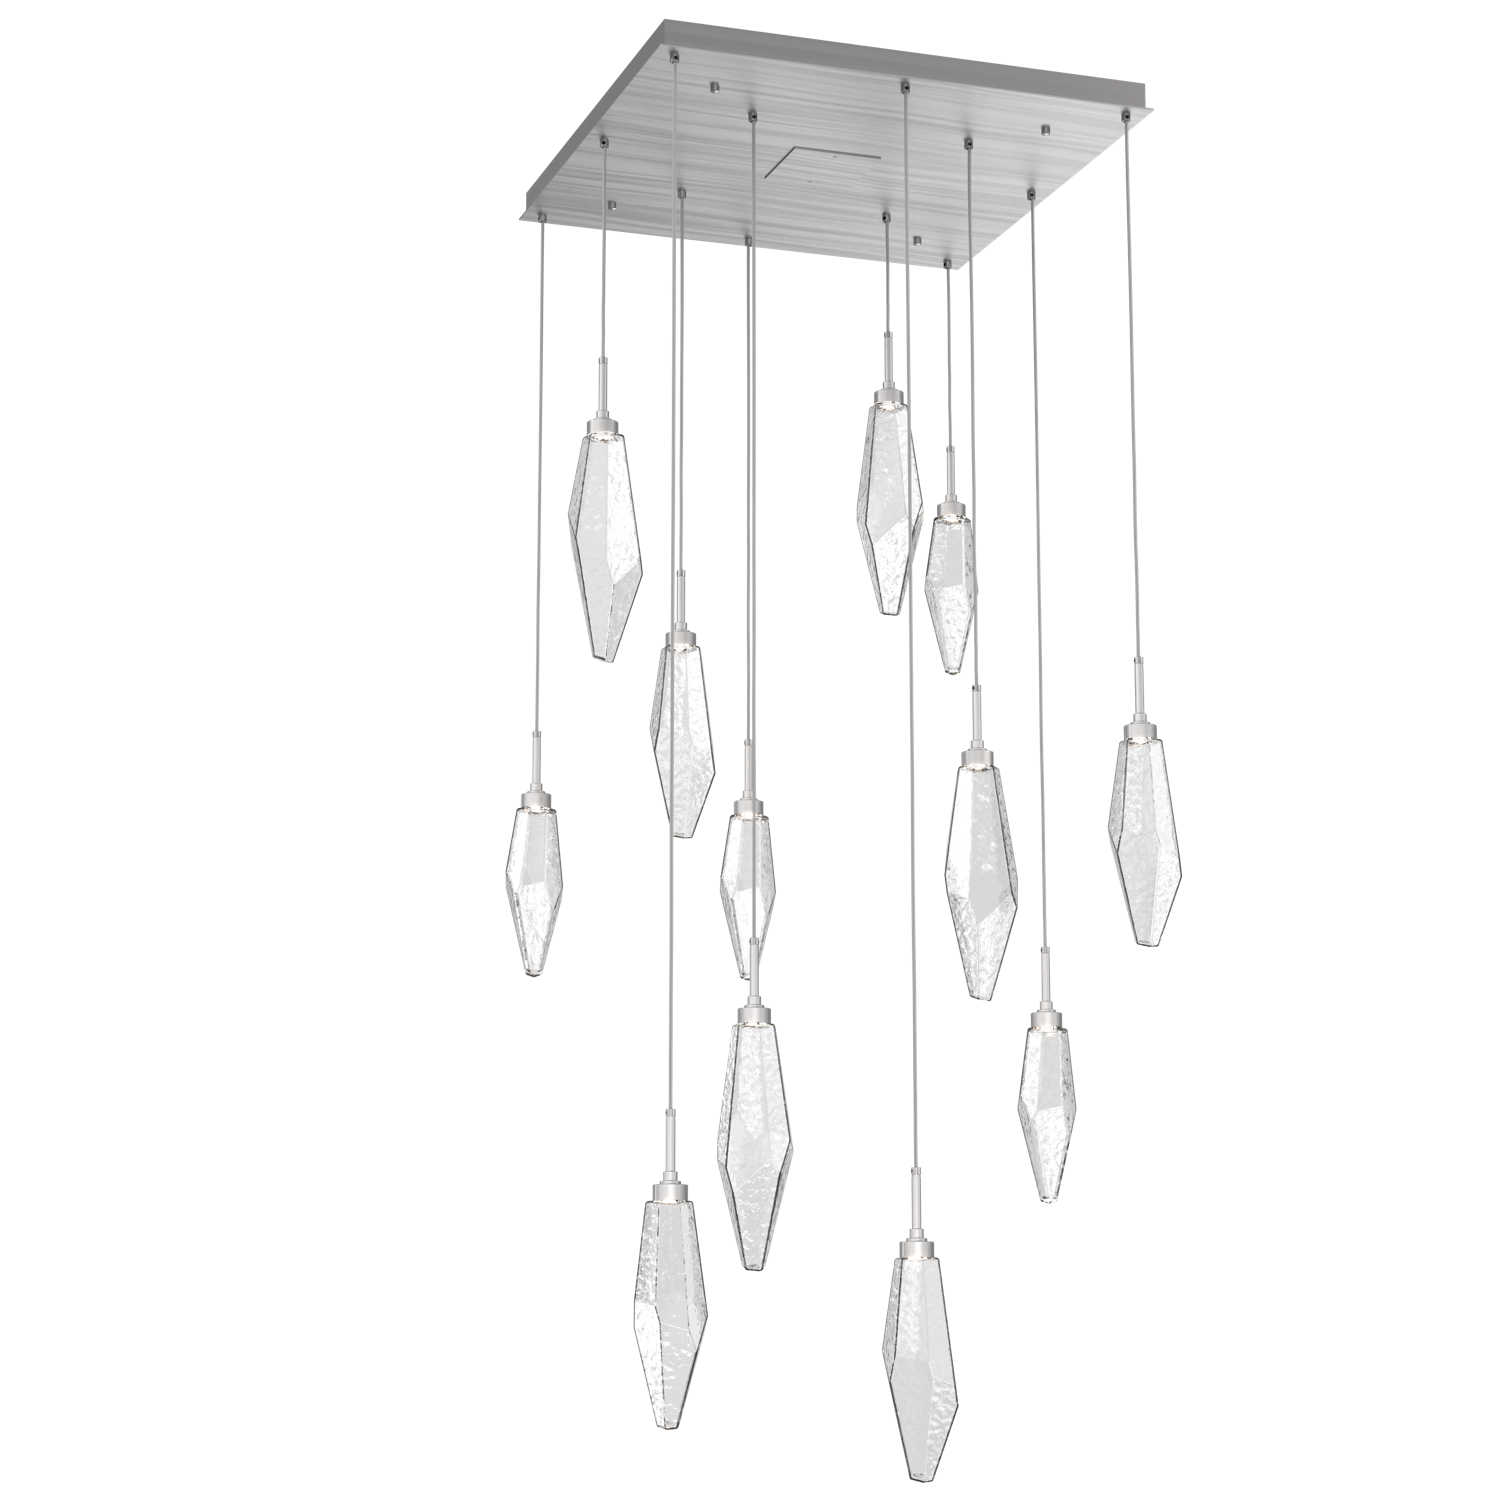 CHB0050-12-SN-CC-Hammerton-Studio-Rock-Crystal-12-light-square-pendant-chandelier-with-satin-nickel-finish-and-clear-glass-shades-and-LED-lamping